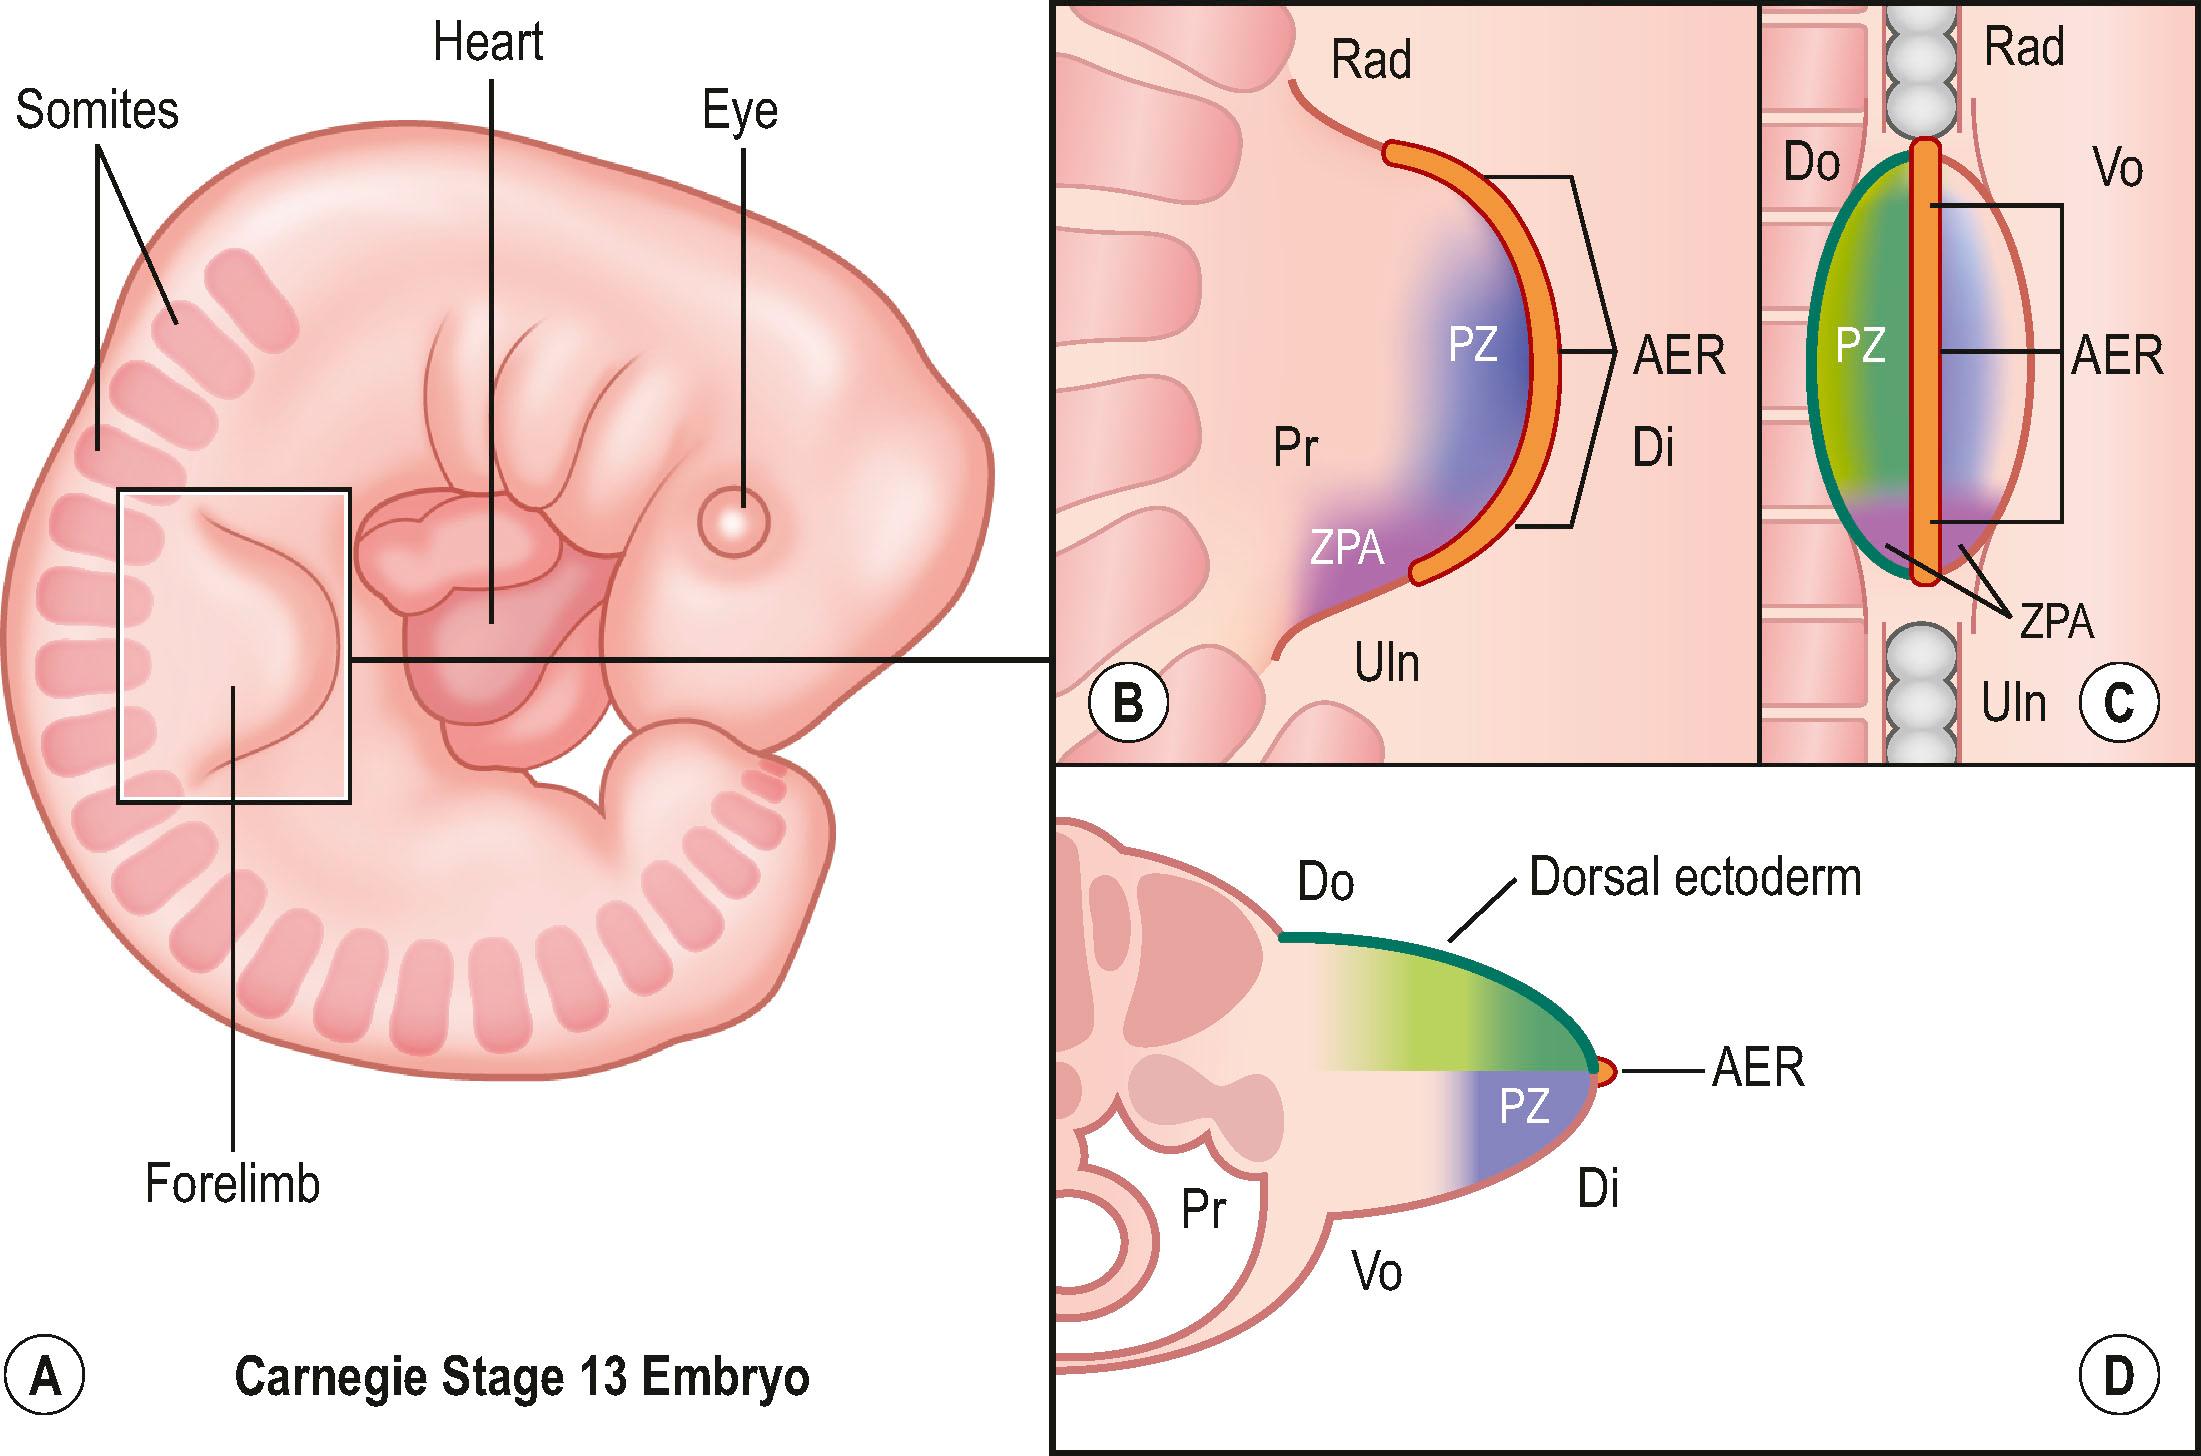 Figure 32.2, Limb bud coordinate axes and signaling centers. (A) The forelimb (boxed region) of a Carnegie stage 13 embryo depicting the three coordinate axes – each with its own signaling center (B–D) : the apical ectodermal ridge (AER) coordinating proximodistal (Pr–Di) outgrowth and differentiation; dorsovolar (Do–Vo) asymmetry is regulated by dorsal ectoderm; radioulnar asymmetry is controlled by the zone of polarizing activity (ZPA). Within the progress zone (PZ) the fate of mesodermal cells is determined by these signaling centers. The axes and signaling centers are shown in three different orientations: (B) dorsal view, (C) lateral, end-on view, and (D) axial cross-section.